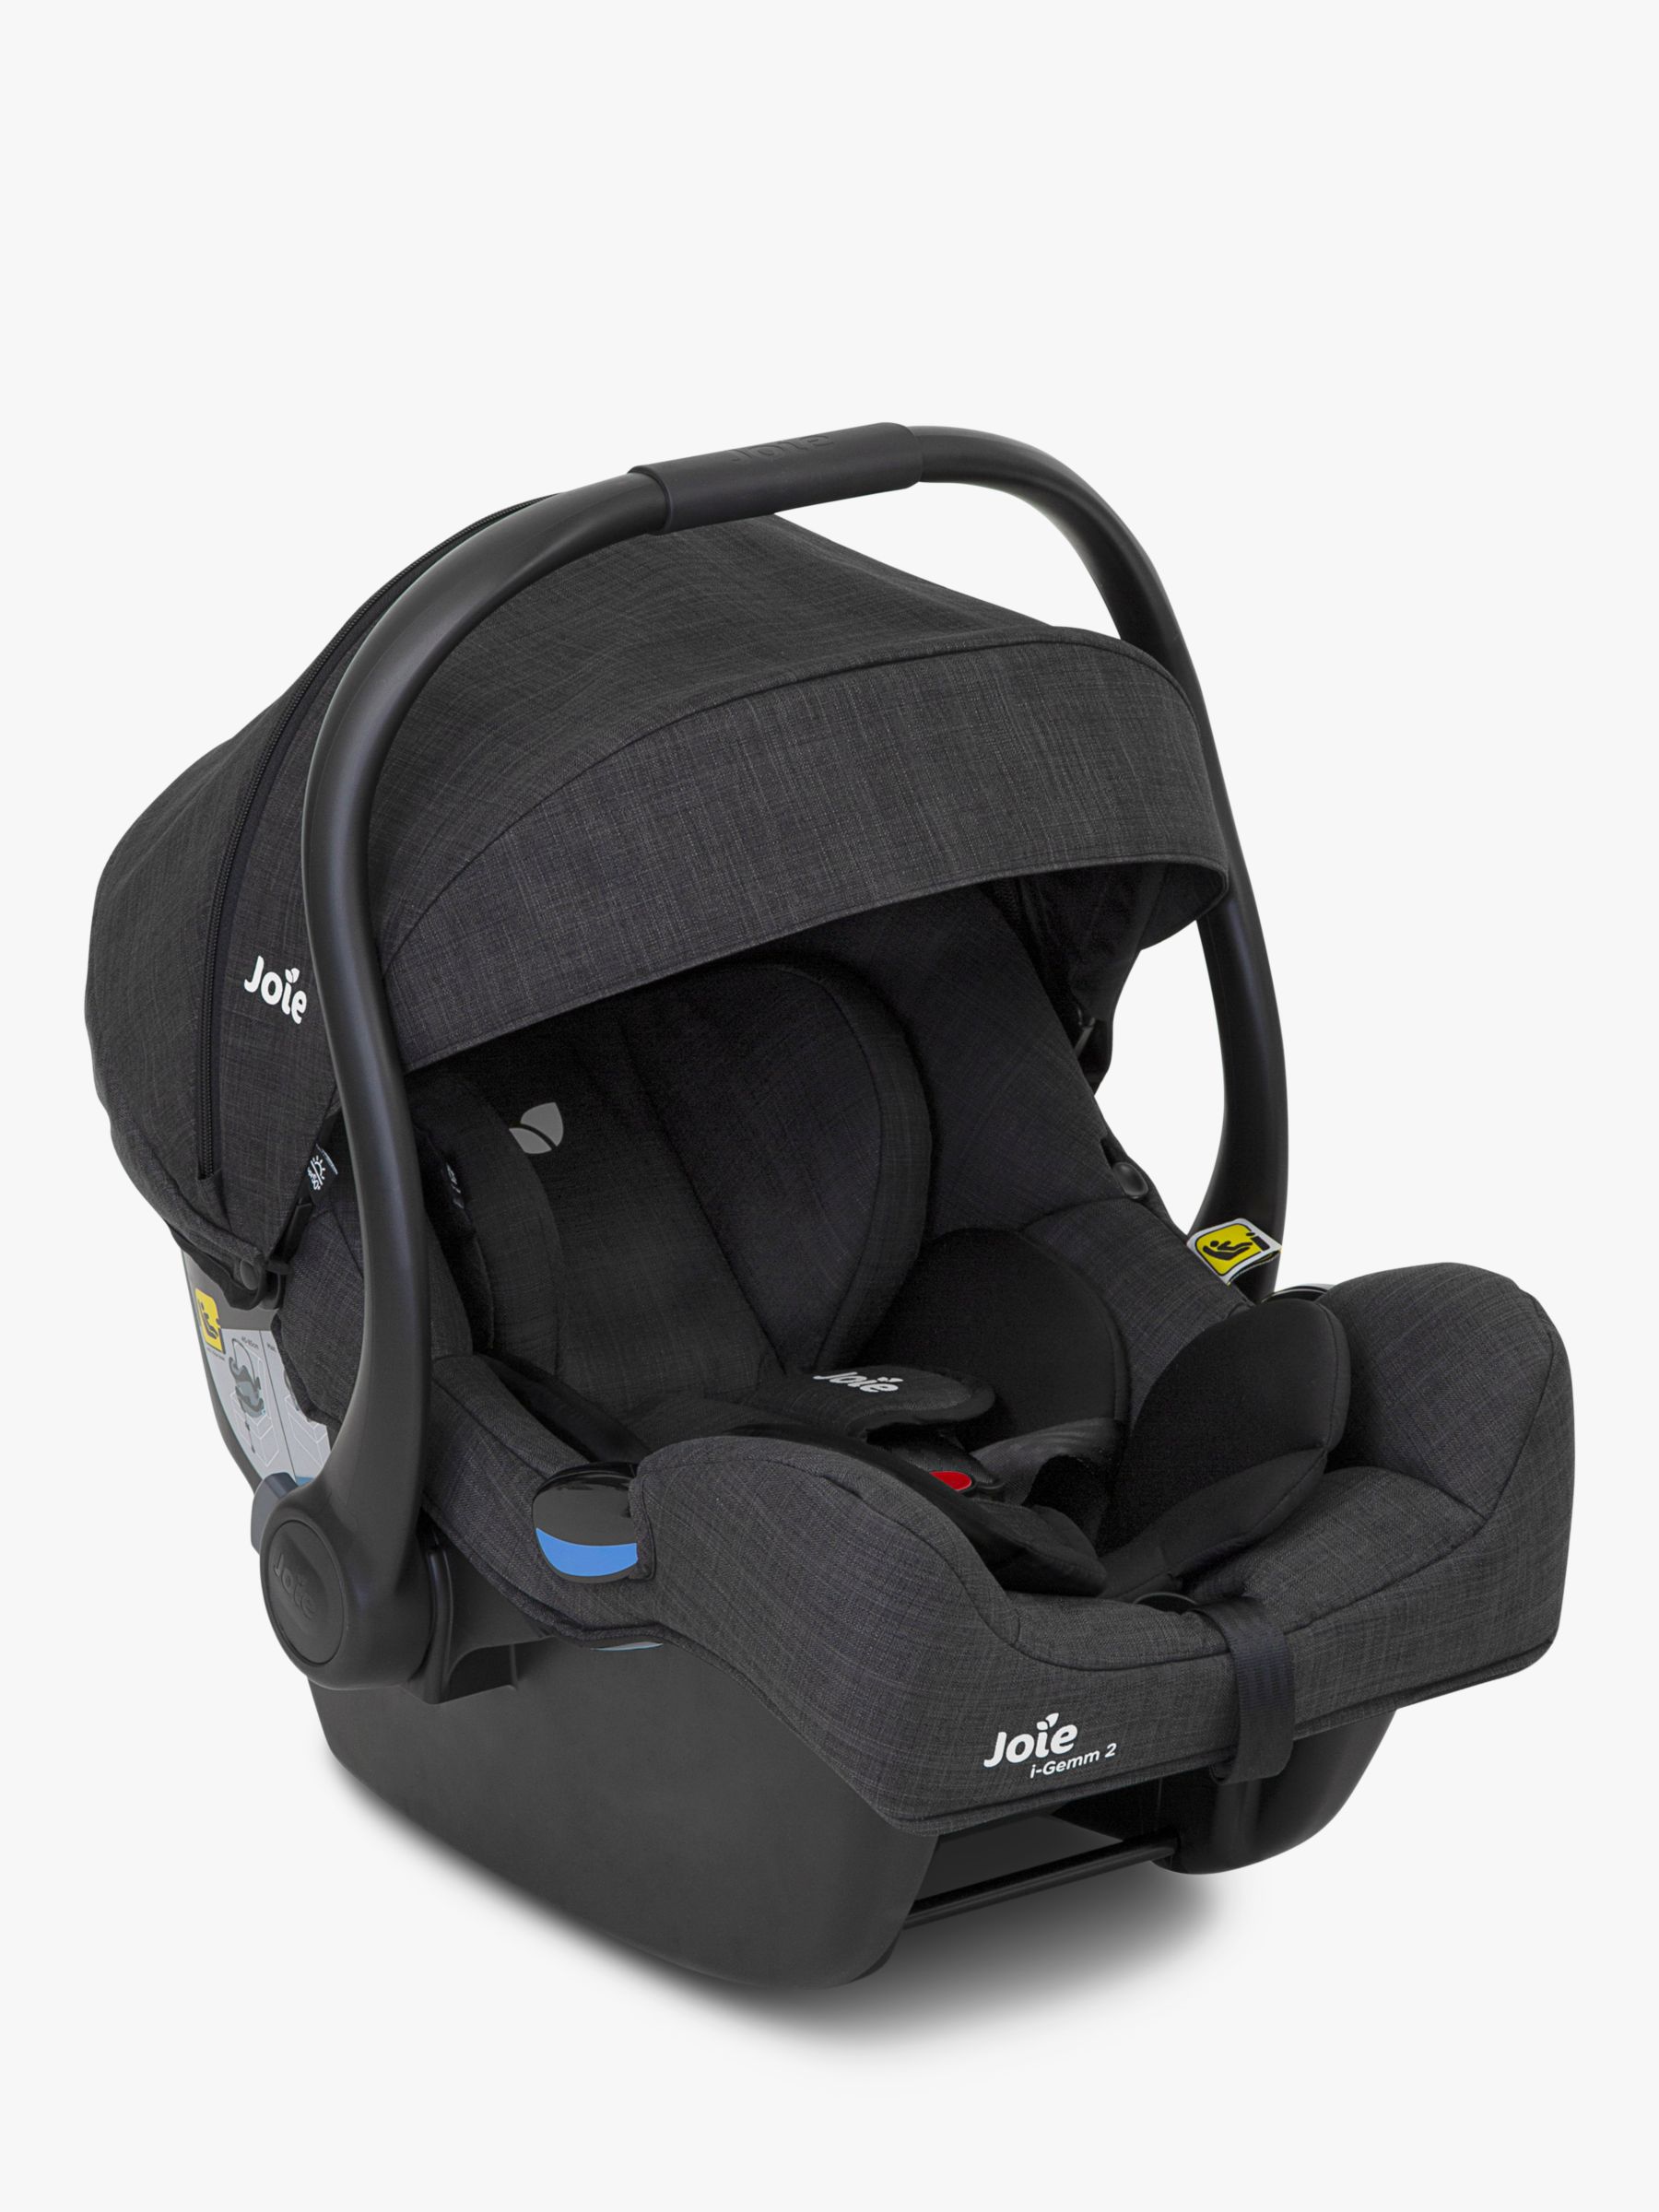 Joie Baby i-Gemm Group 0+ Baby Car Seat, Pavement Grey